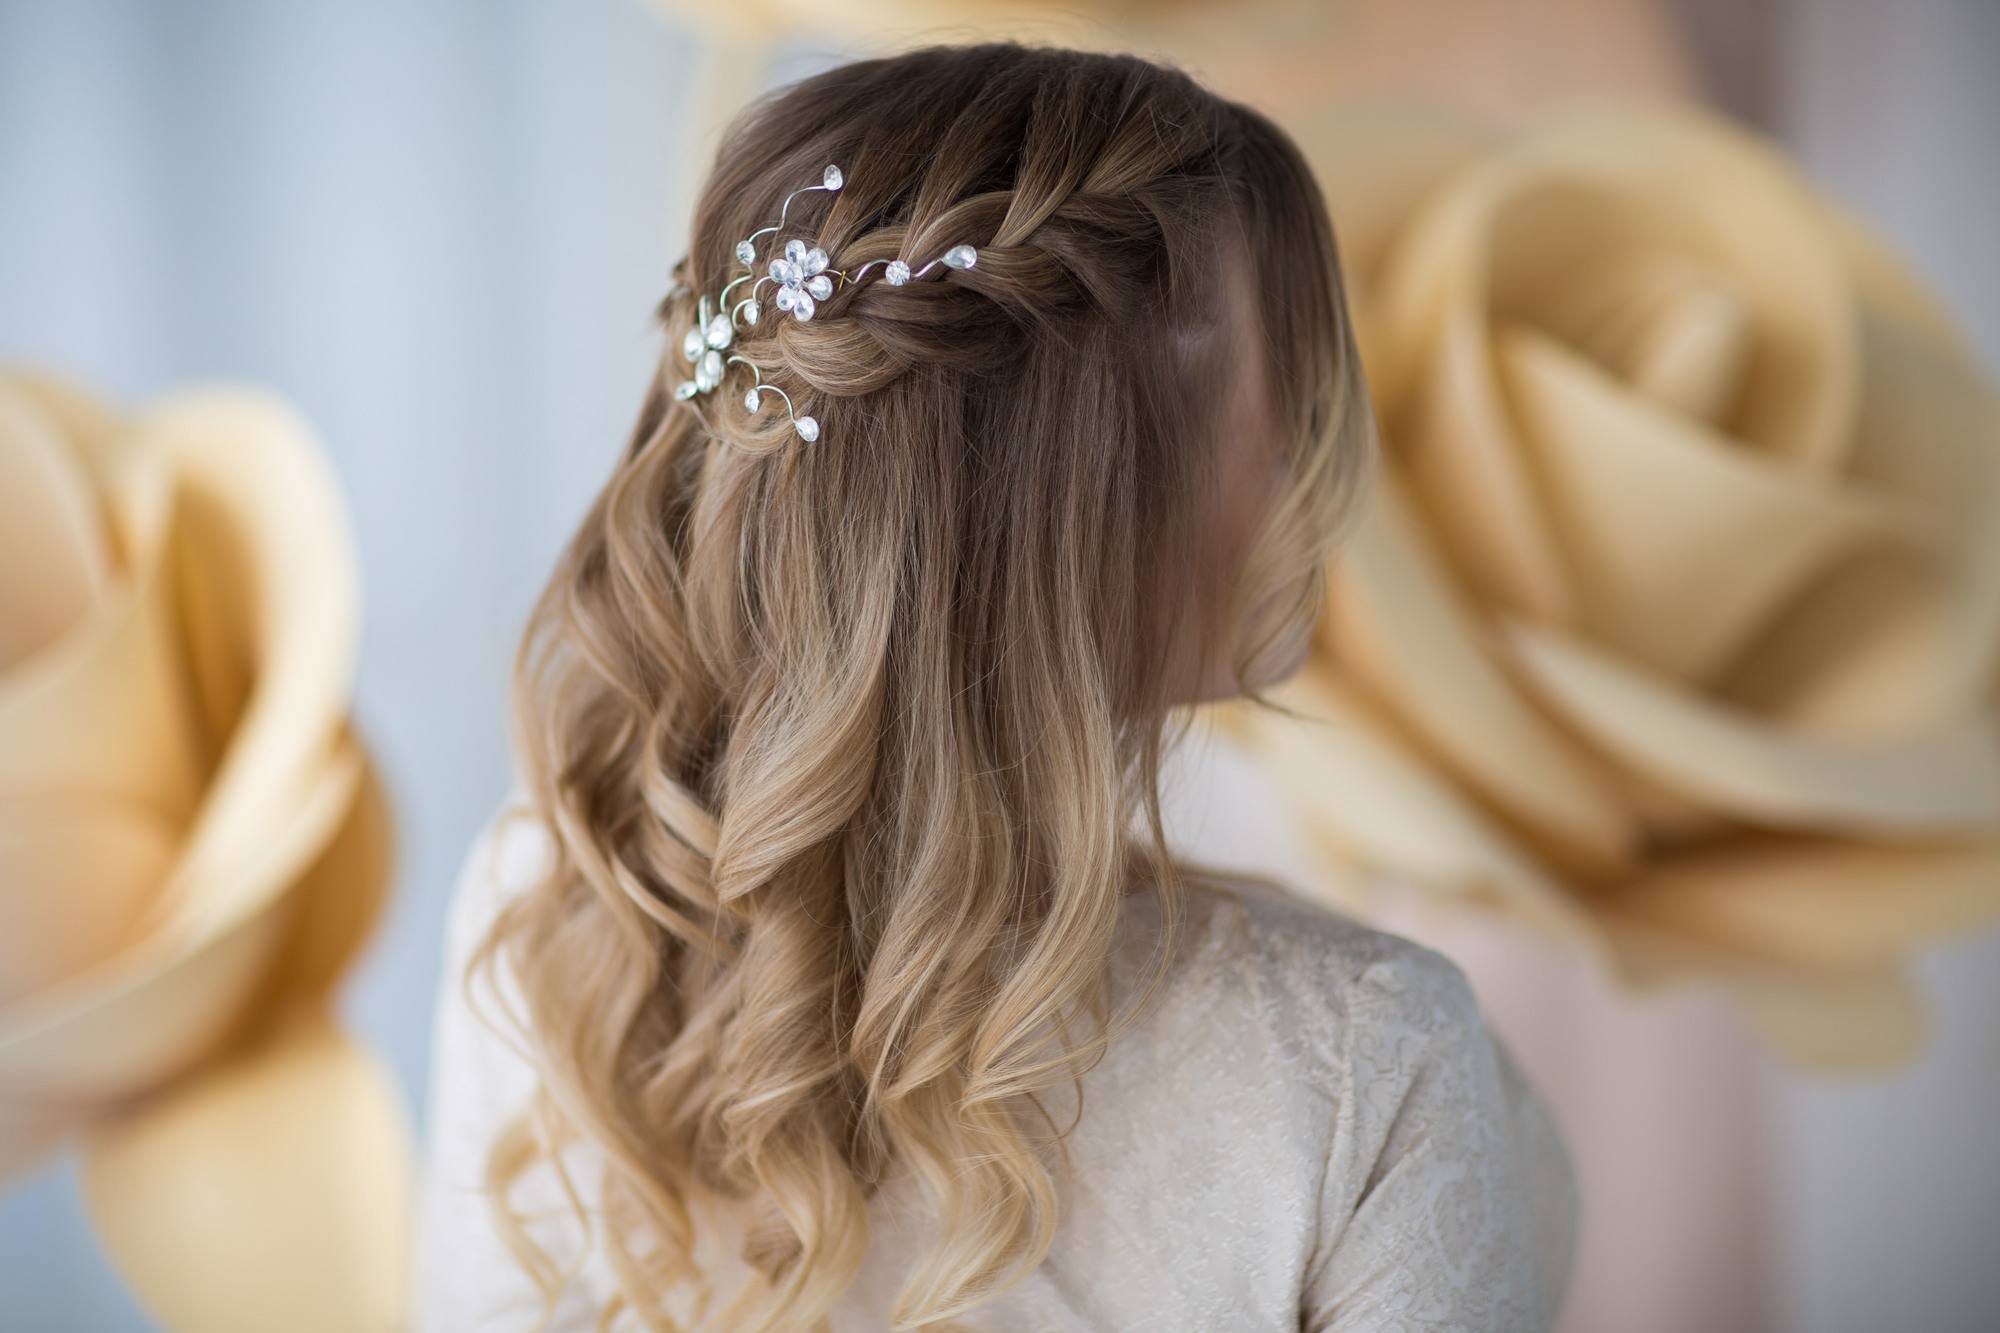 Update: Here's The Hairstyle I Did For My Engagement Party | Glamour